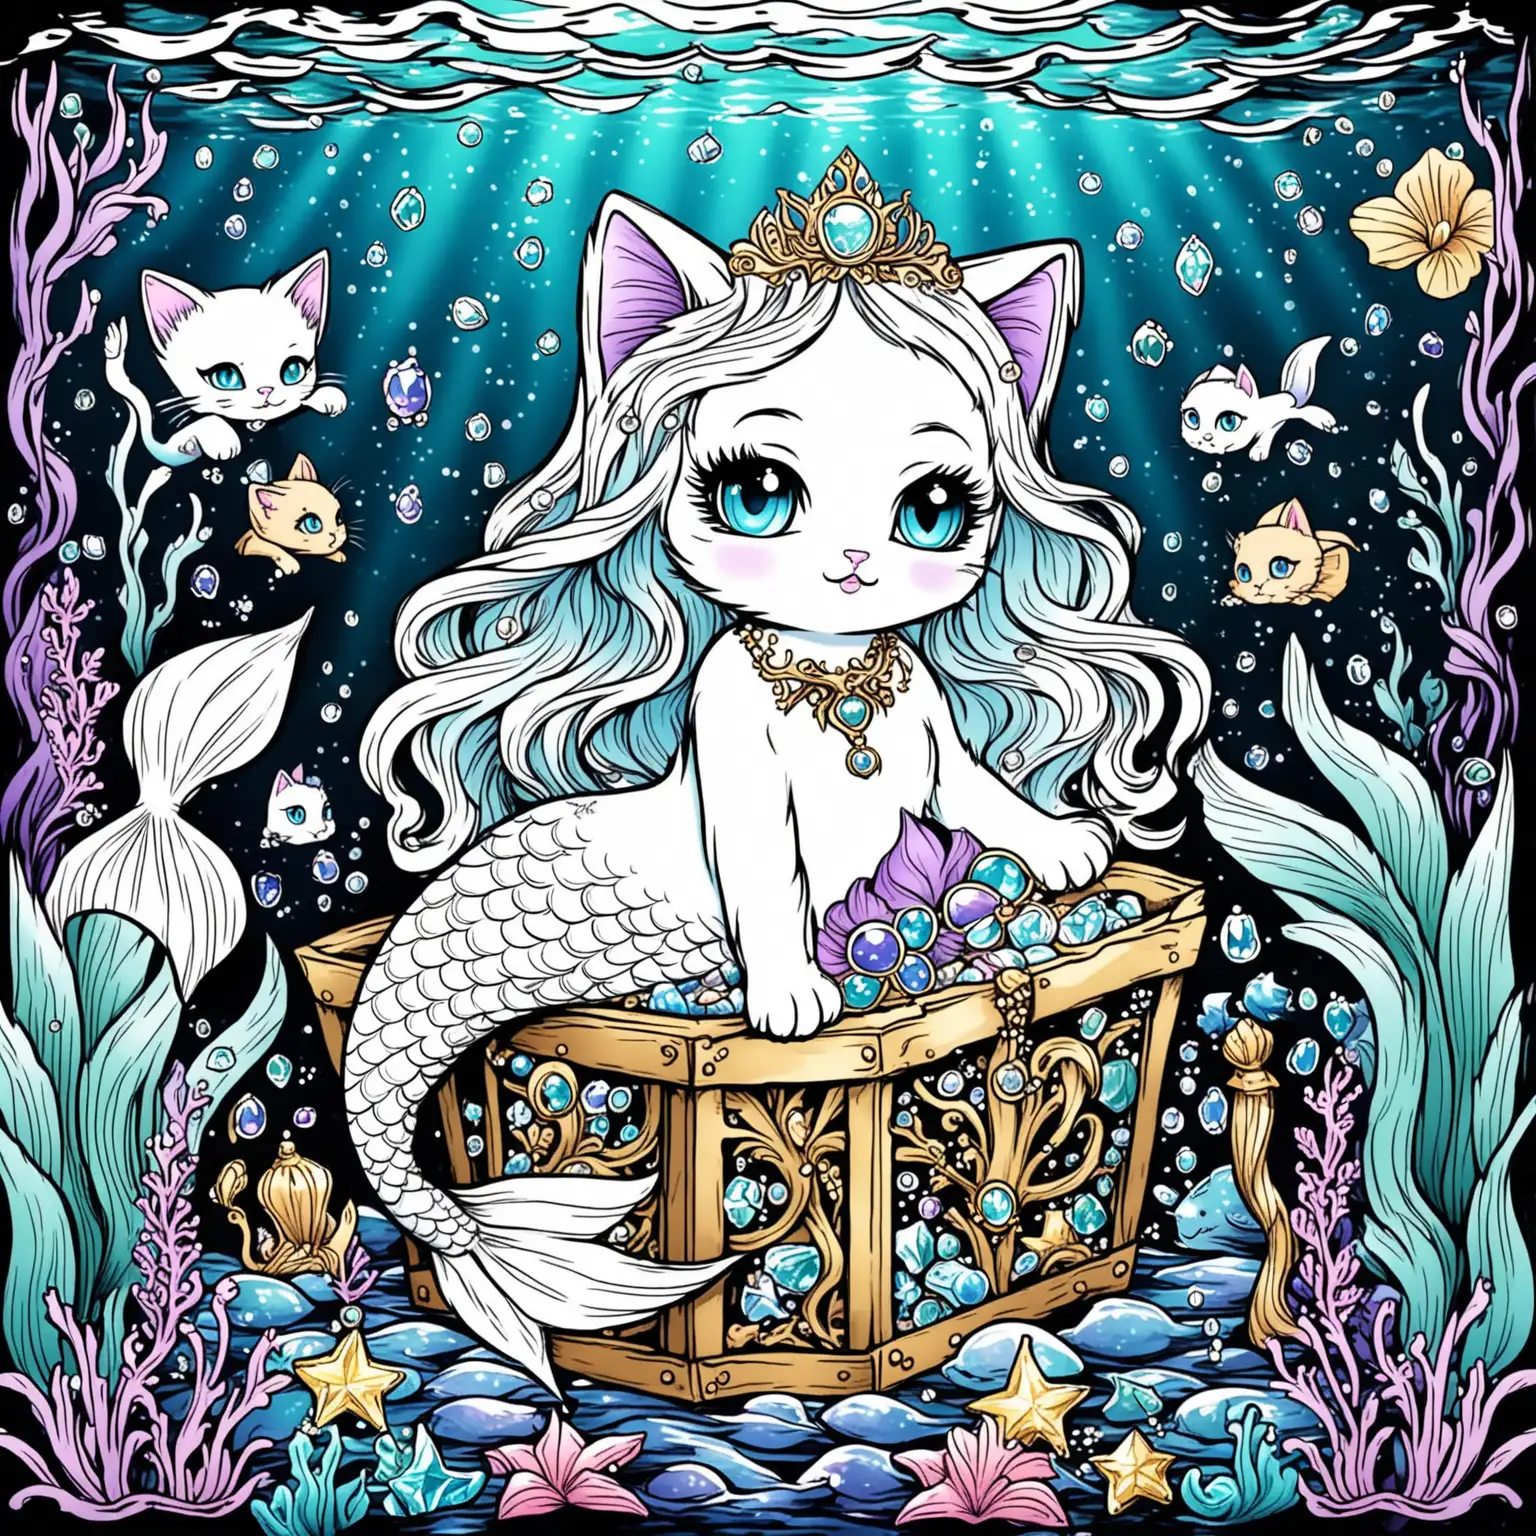 Coloring page featuring the mermaid kitten with predominantly white features, in a treasure-themed, dreamlike underwater environment. The kitten is adorned with sparkling, light-colored mystical jewels and floral elements, posed enchantingly with bold outlines for easy coloring.